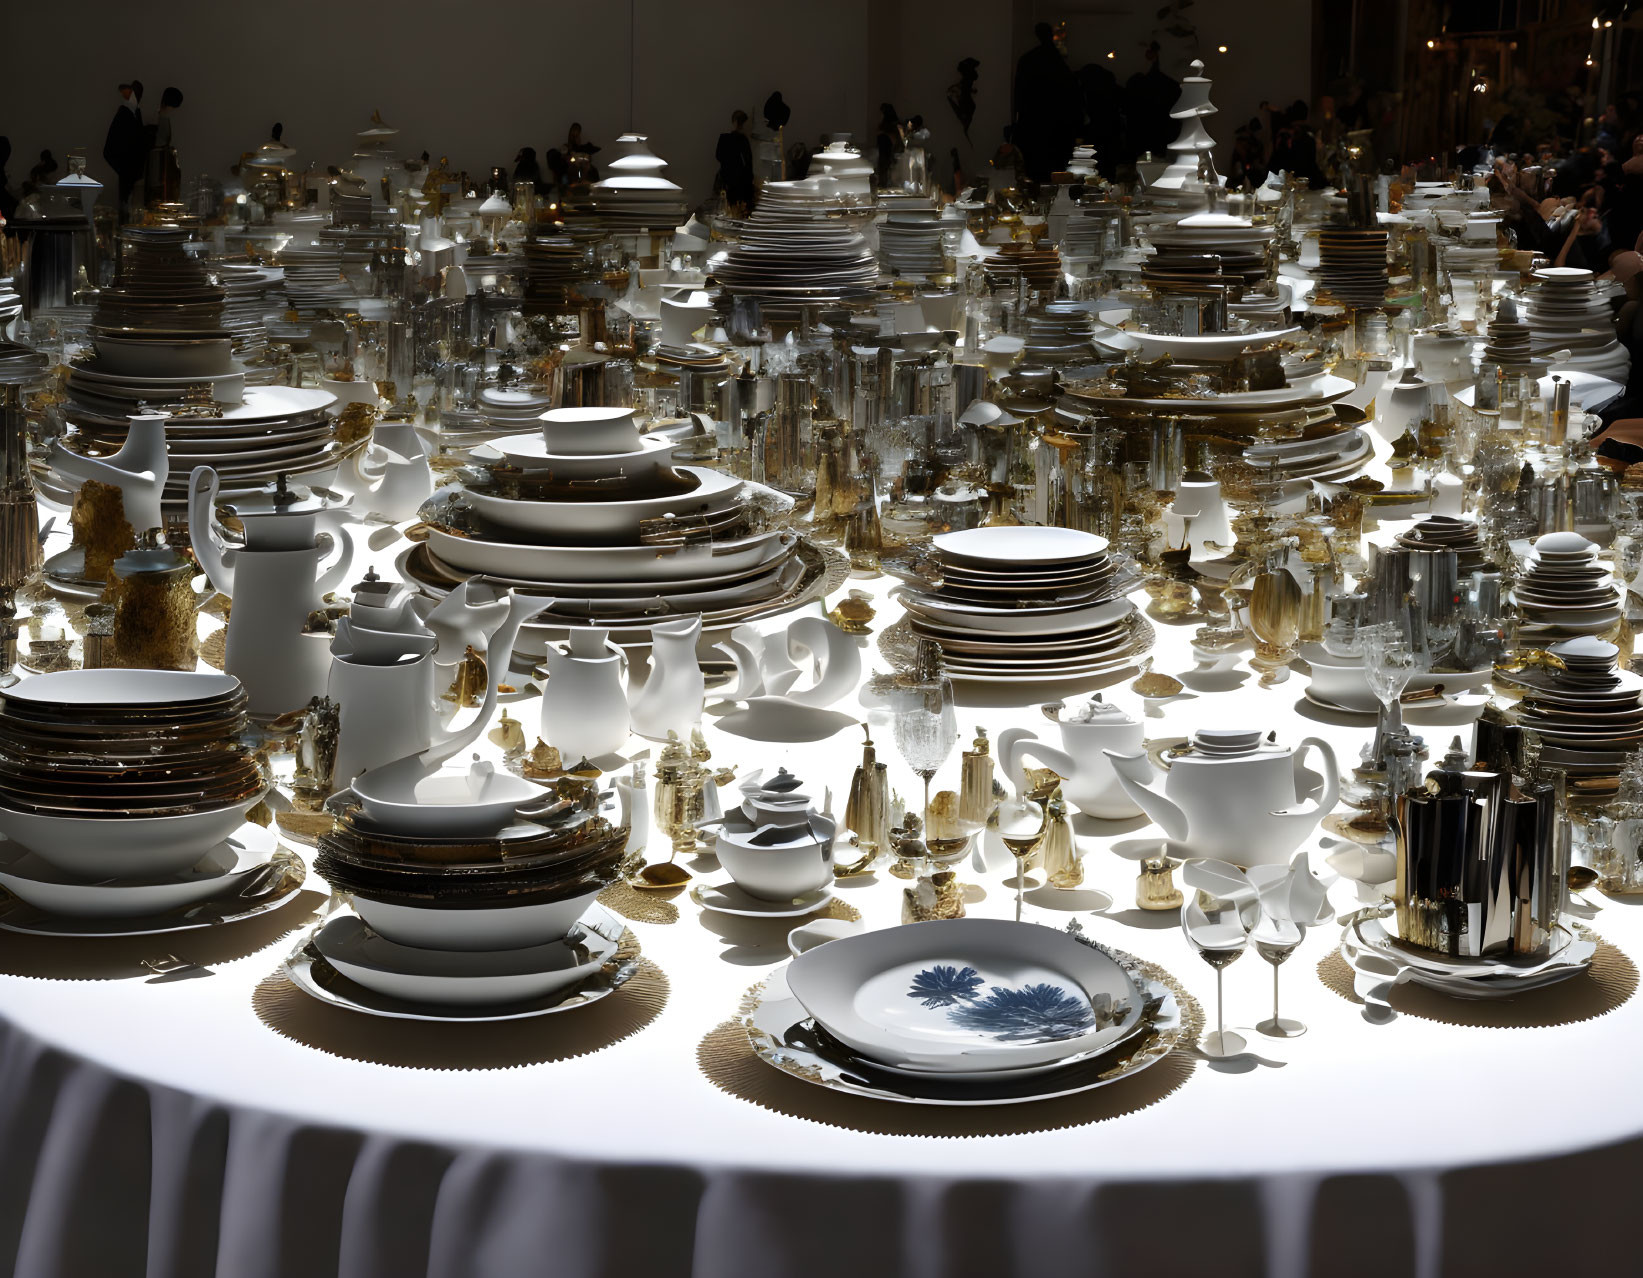 Assorted White Dinnerware and Glassware on Long Table